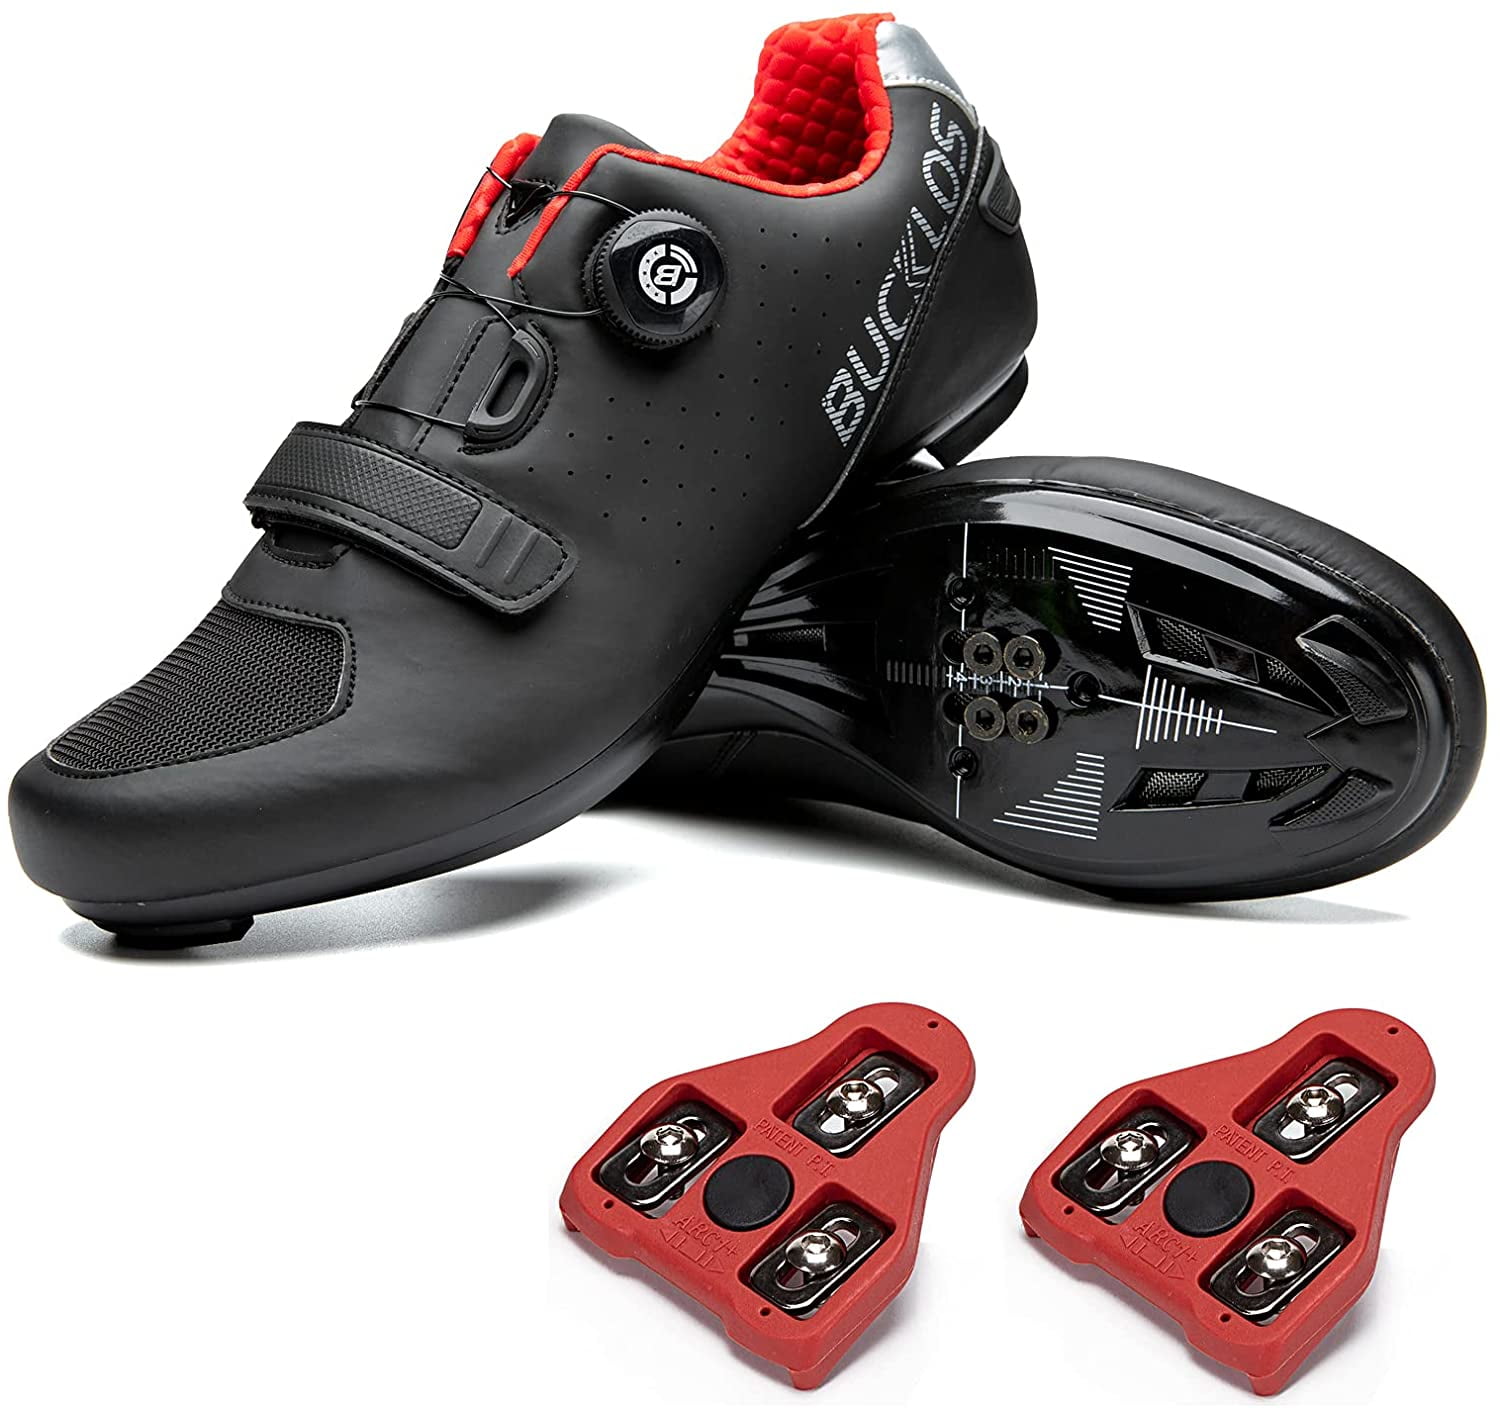 Mens Road Bike Cycling Shoes Compatible with SPD/Delta Cleats Indoor Racing Riding Bikes Peloton Shoes with Rotating Buckle for Men/Women Outoor Lock Pedal Bicycle Shoe 5-12 